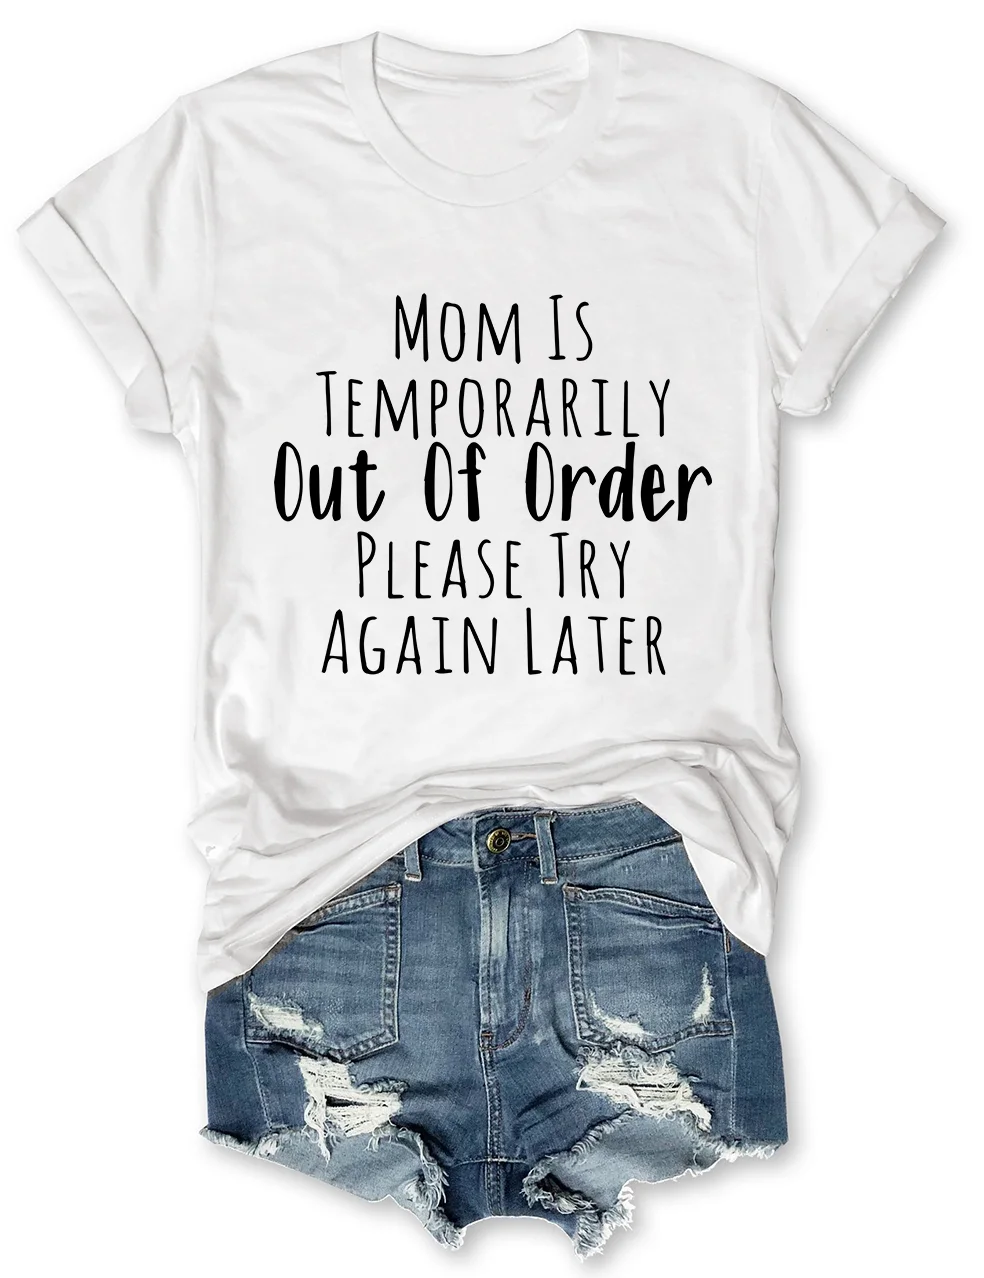 Mom Is Temporarily Out Of Order T-Shirt